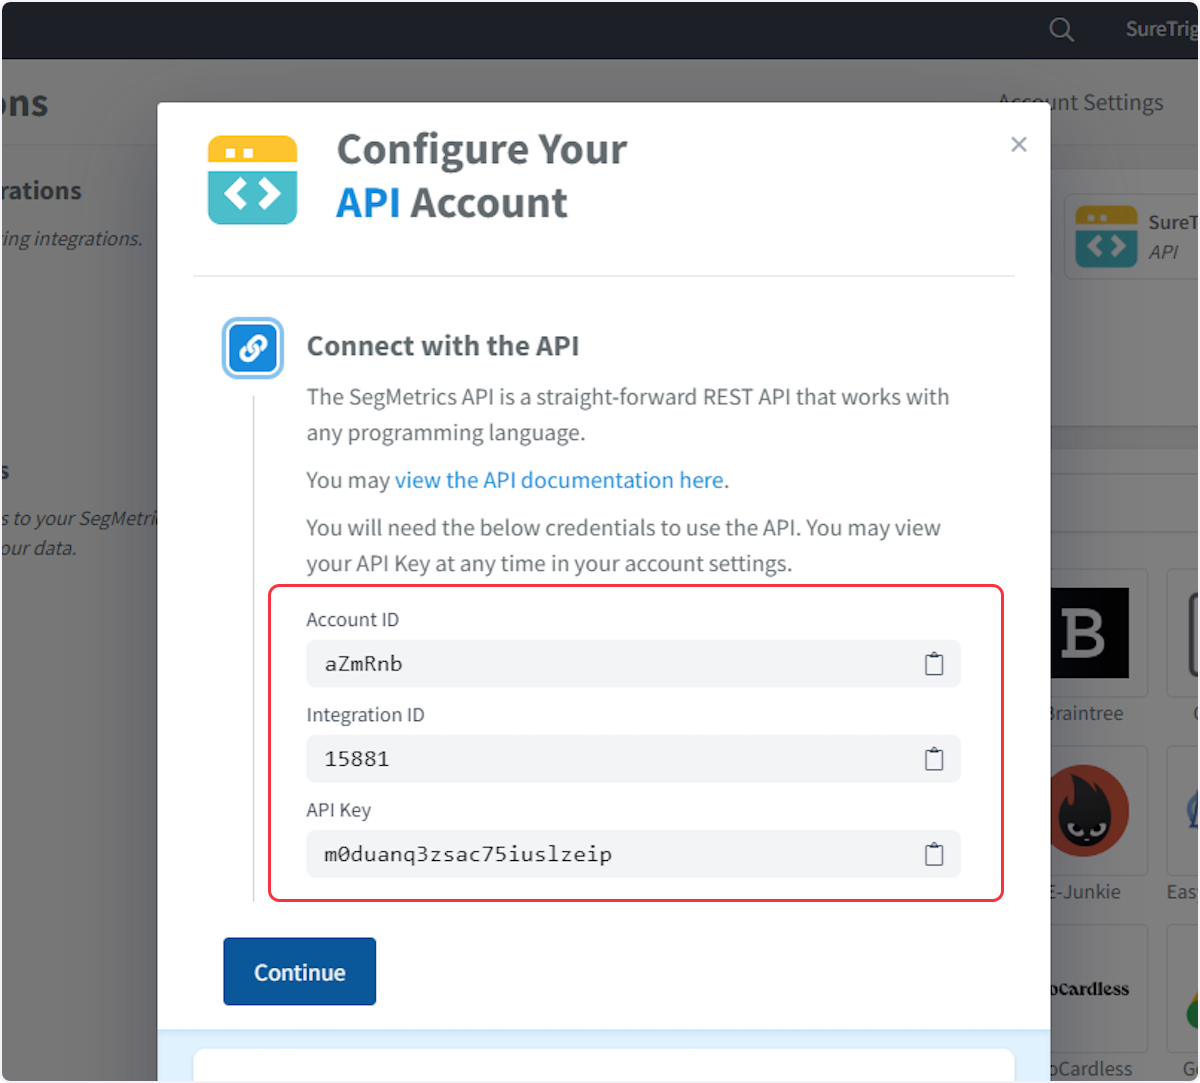 From here, you can copy the Account ID, Integration ID, and API Key, which are necessary to establish a connection with SureTrigger. That's it!